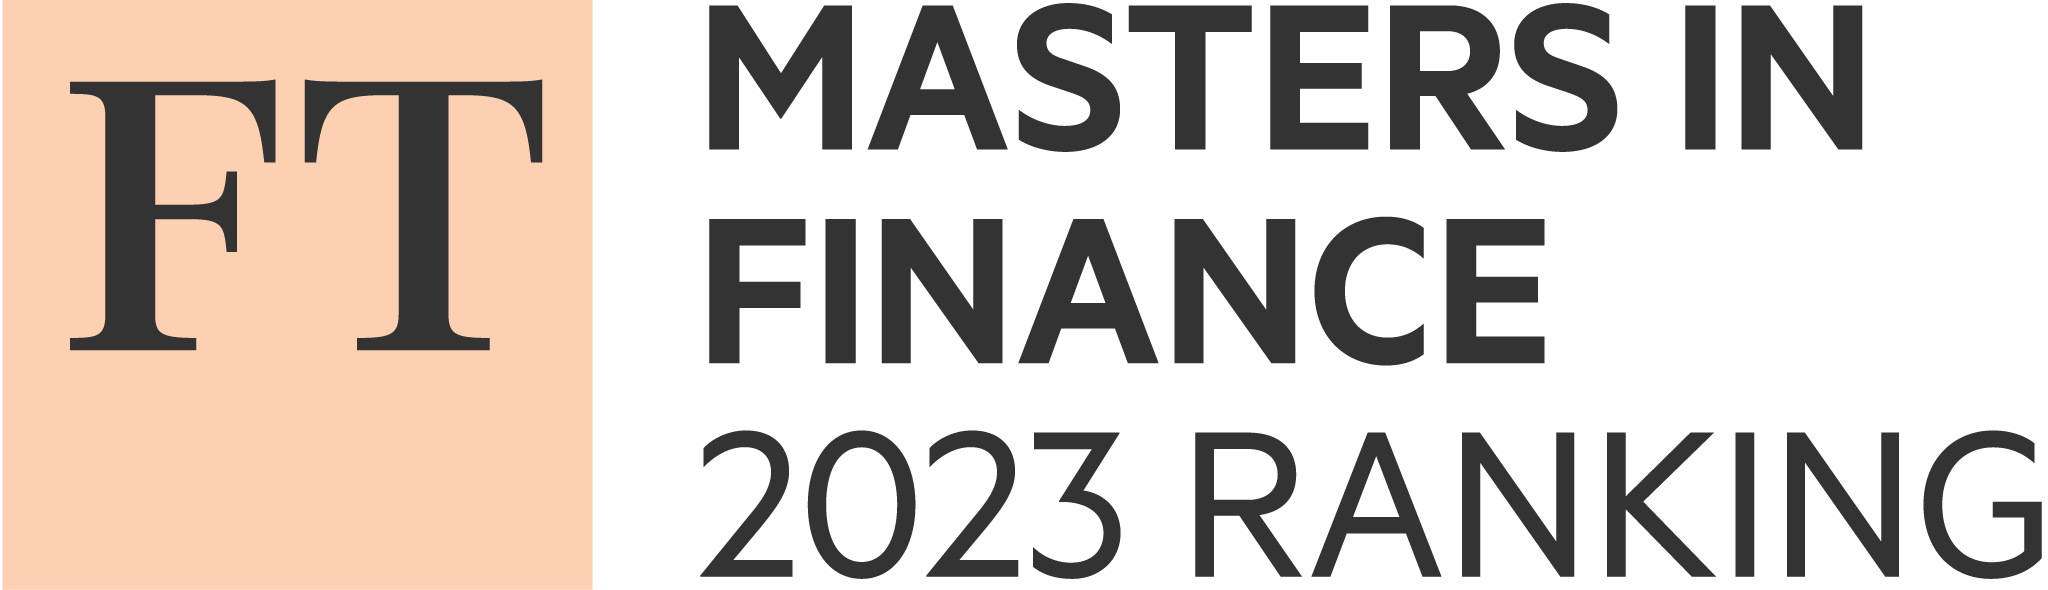 FT Master in Finance 2023.png